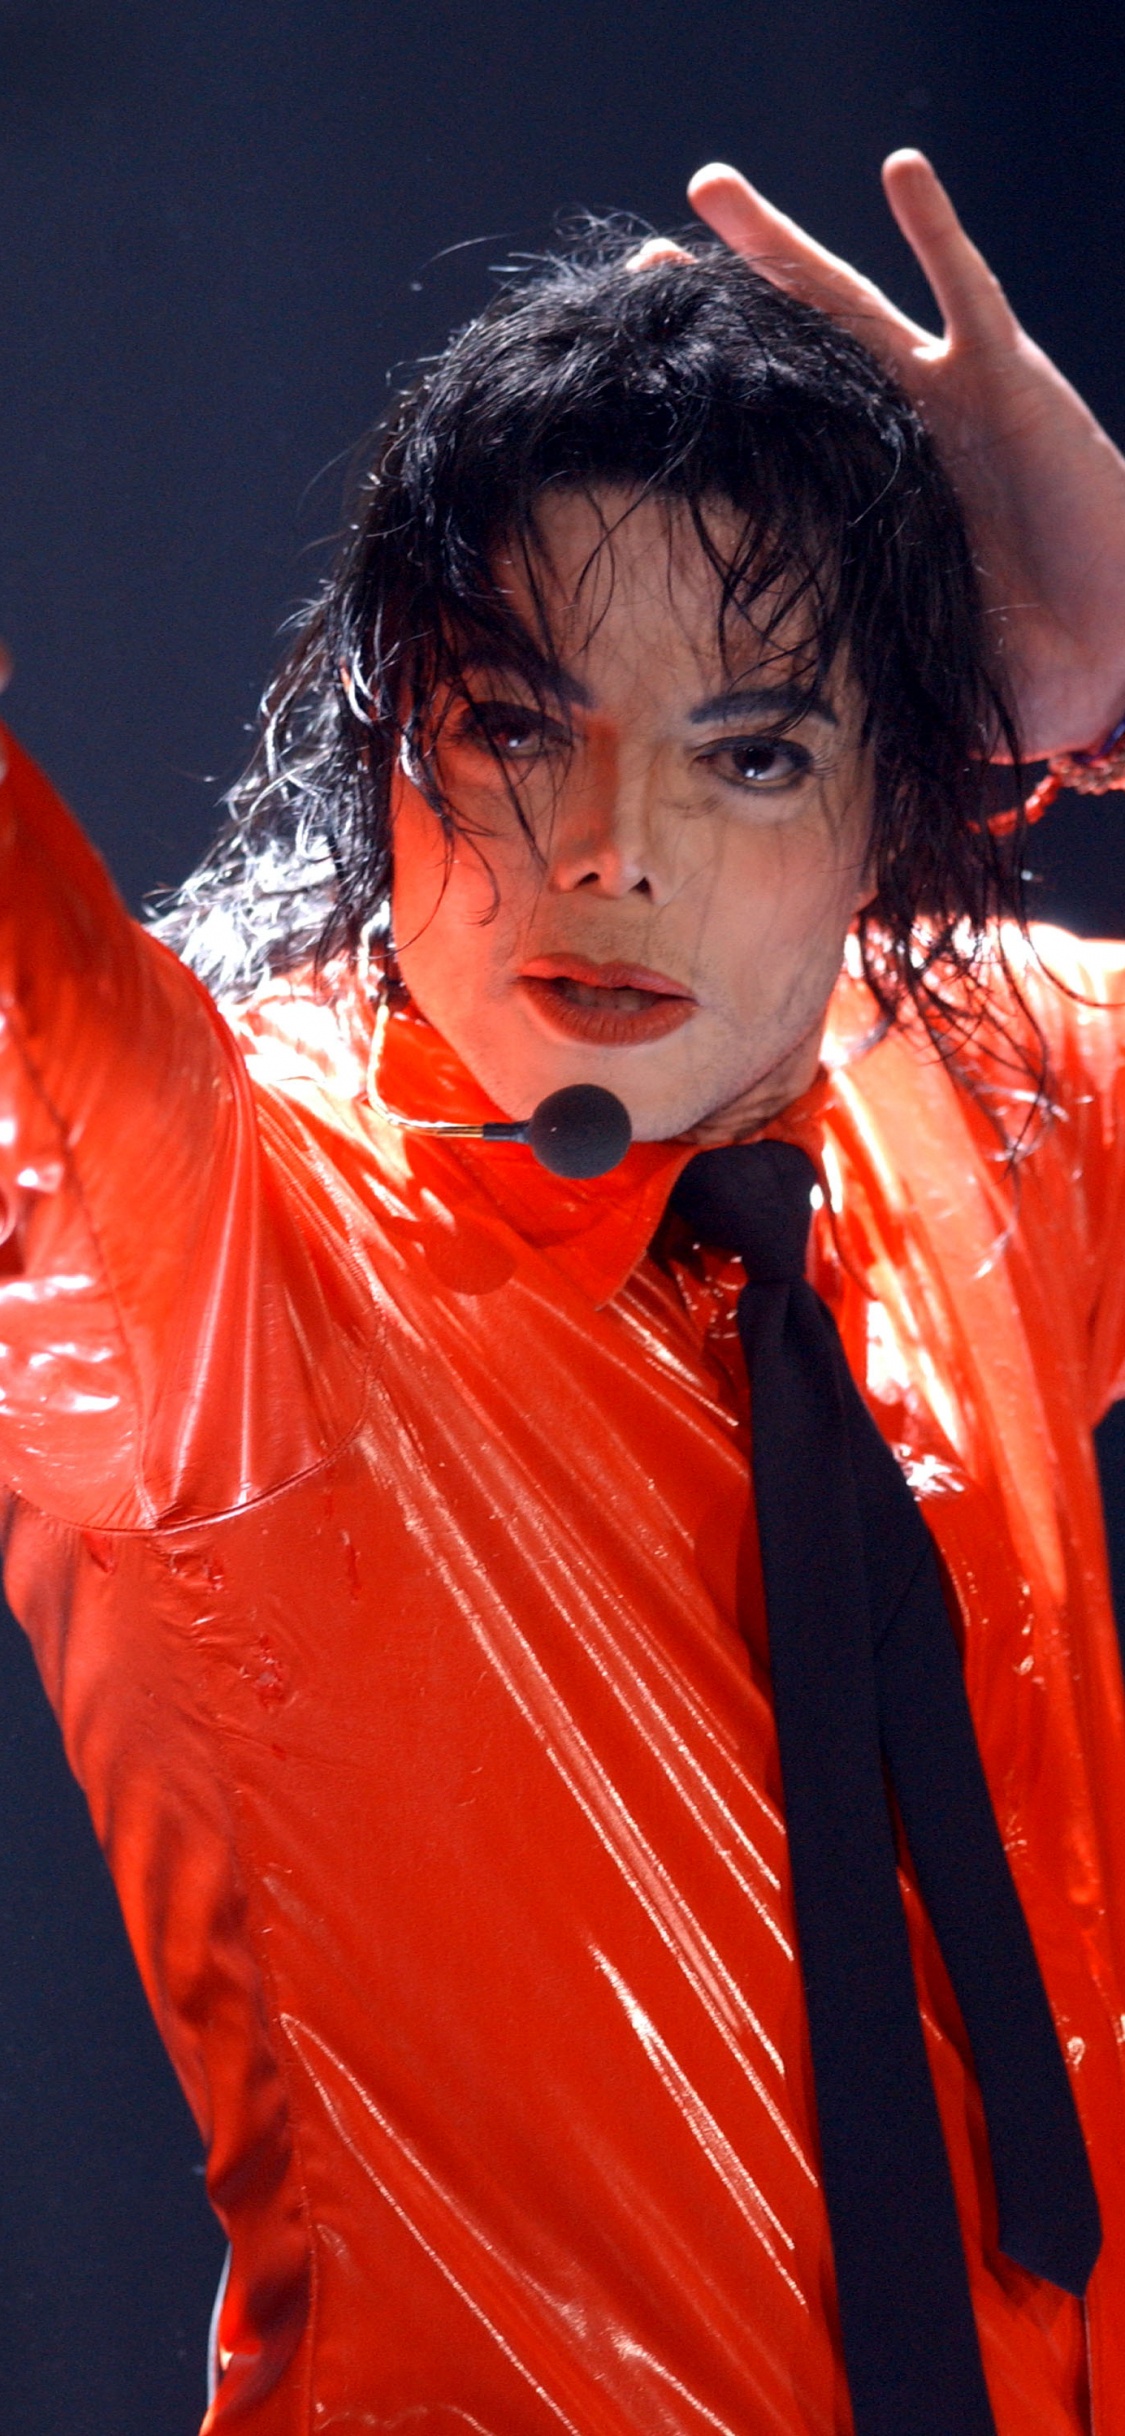 Michael Jackson, Performance, Red, Performing Arts, Singer. Wallpaper in 1125x2436 Resolution